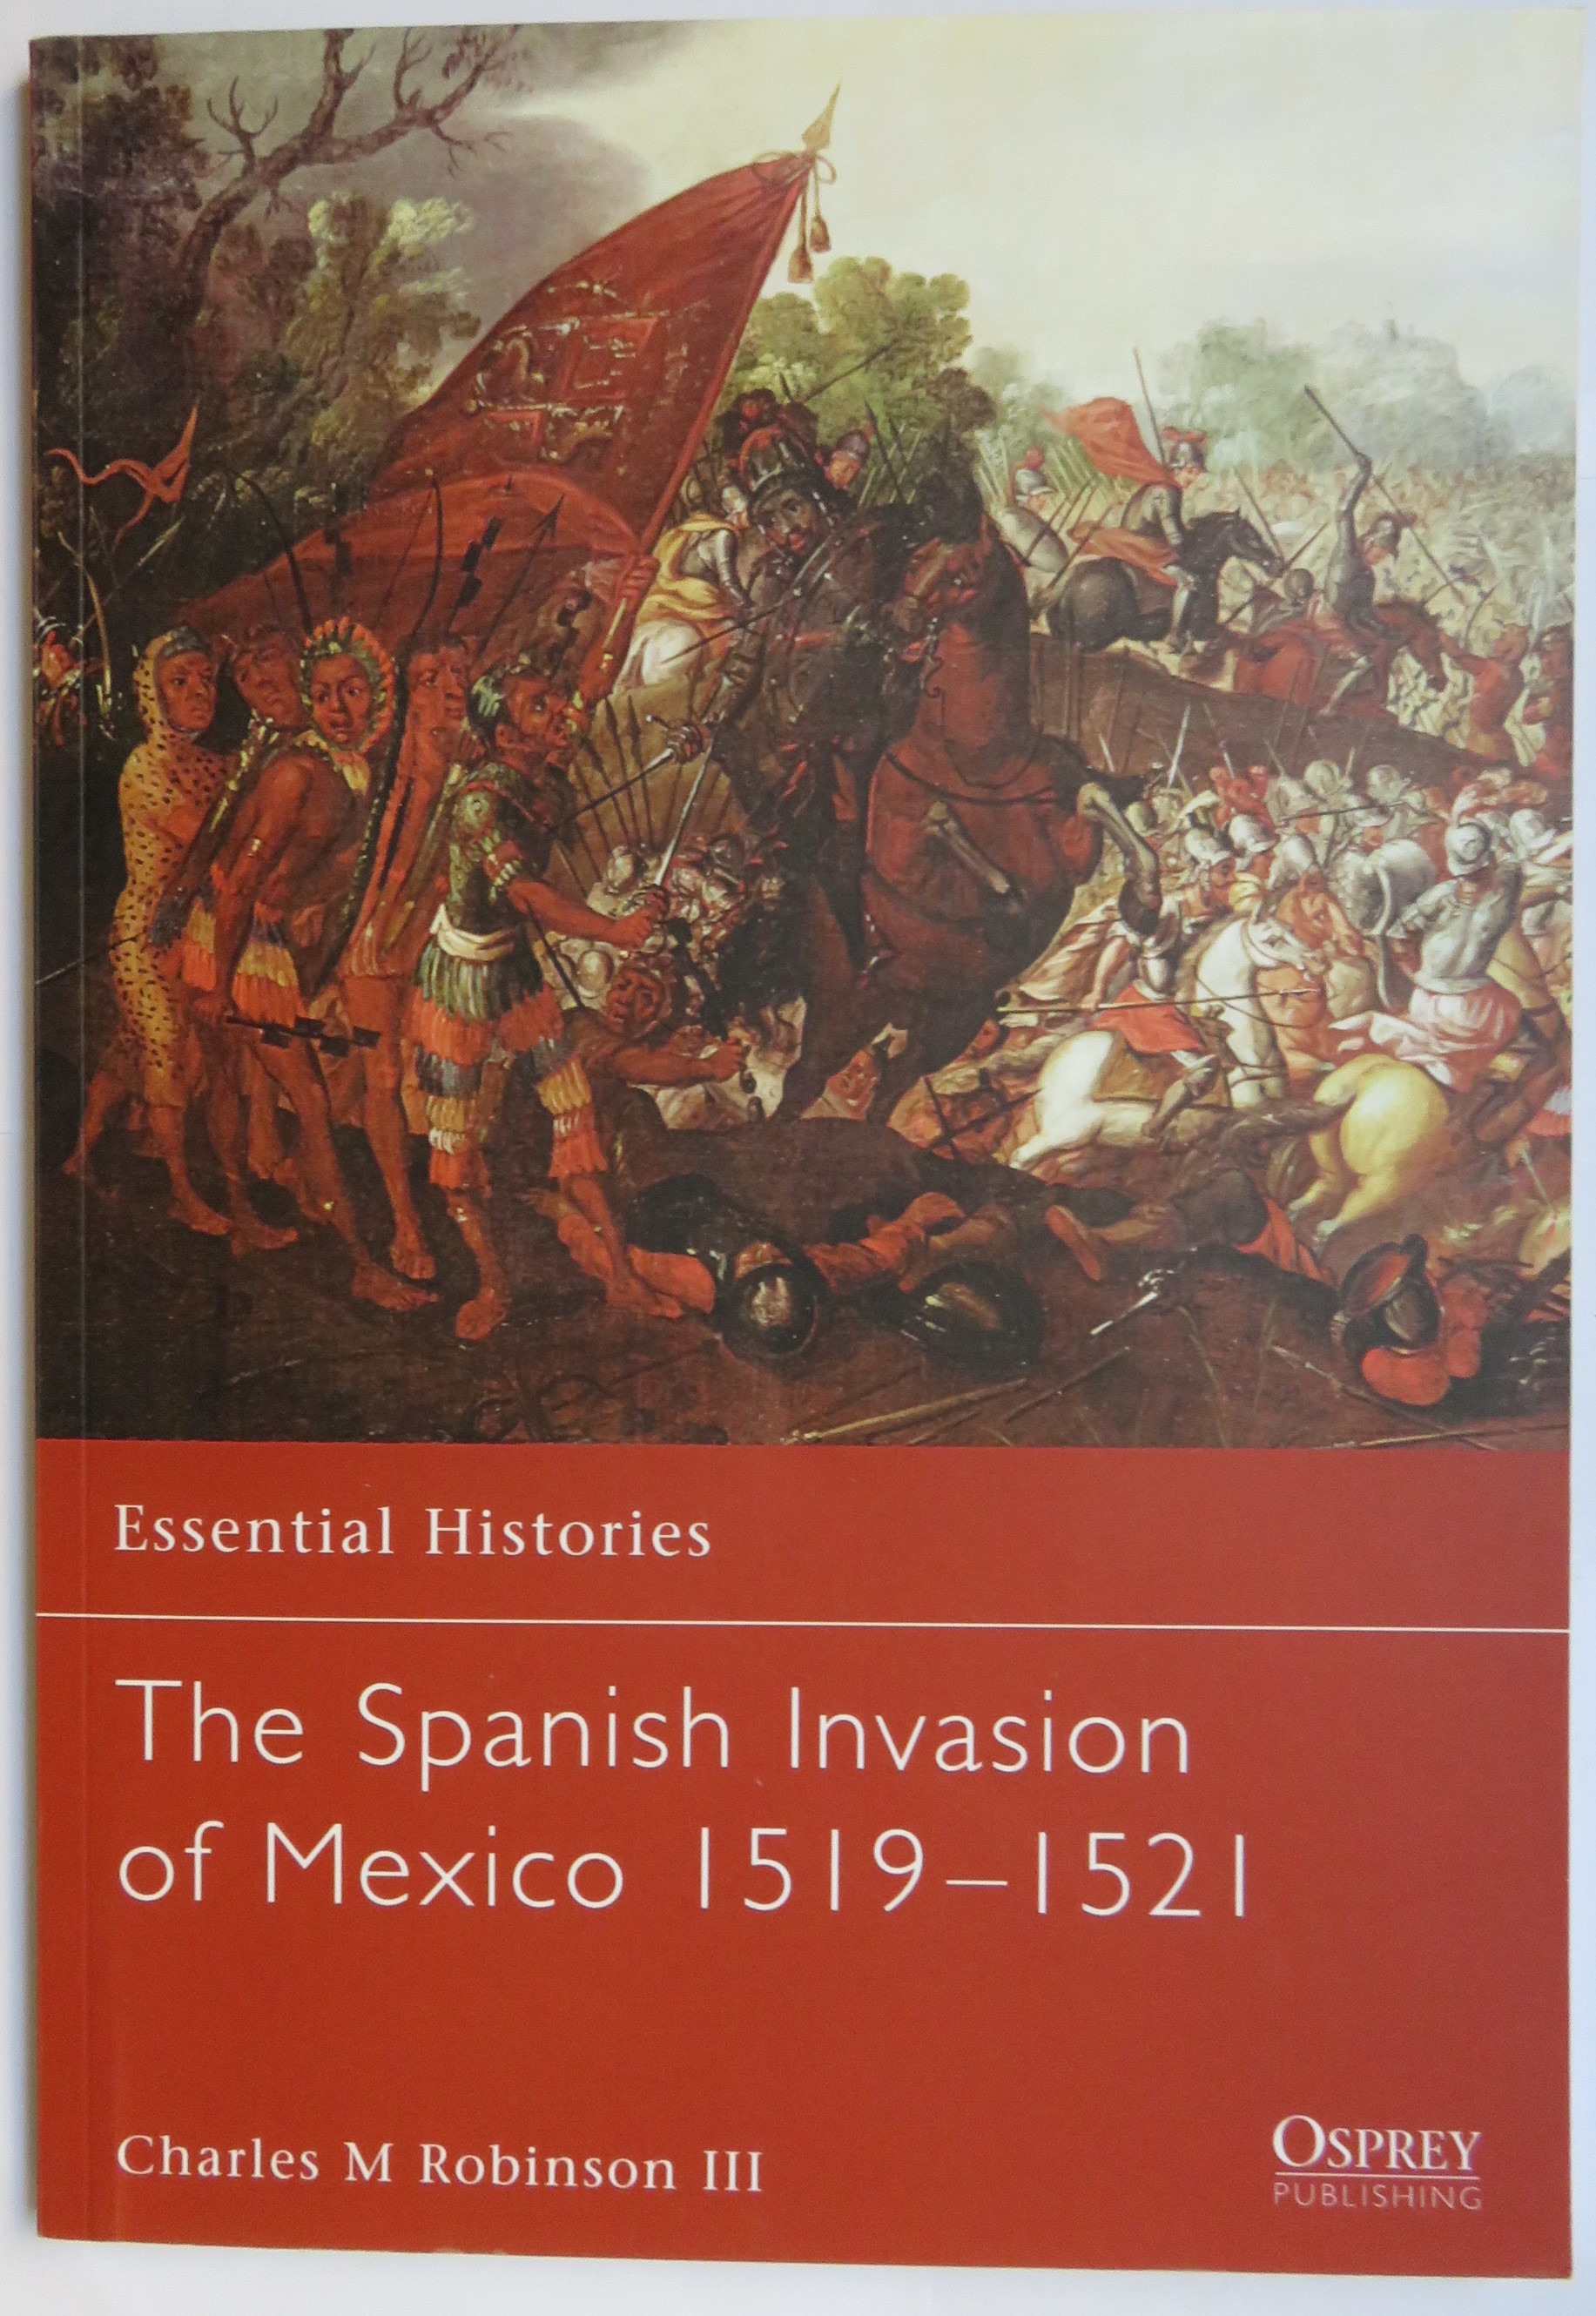 Essential Histories The Spanish Invasion of Mexico 1519-1521 